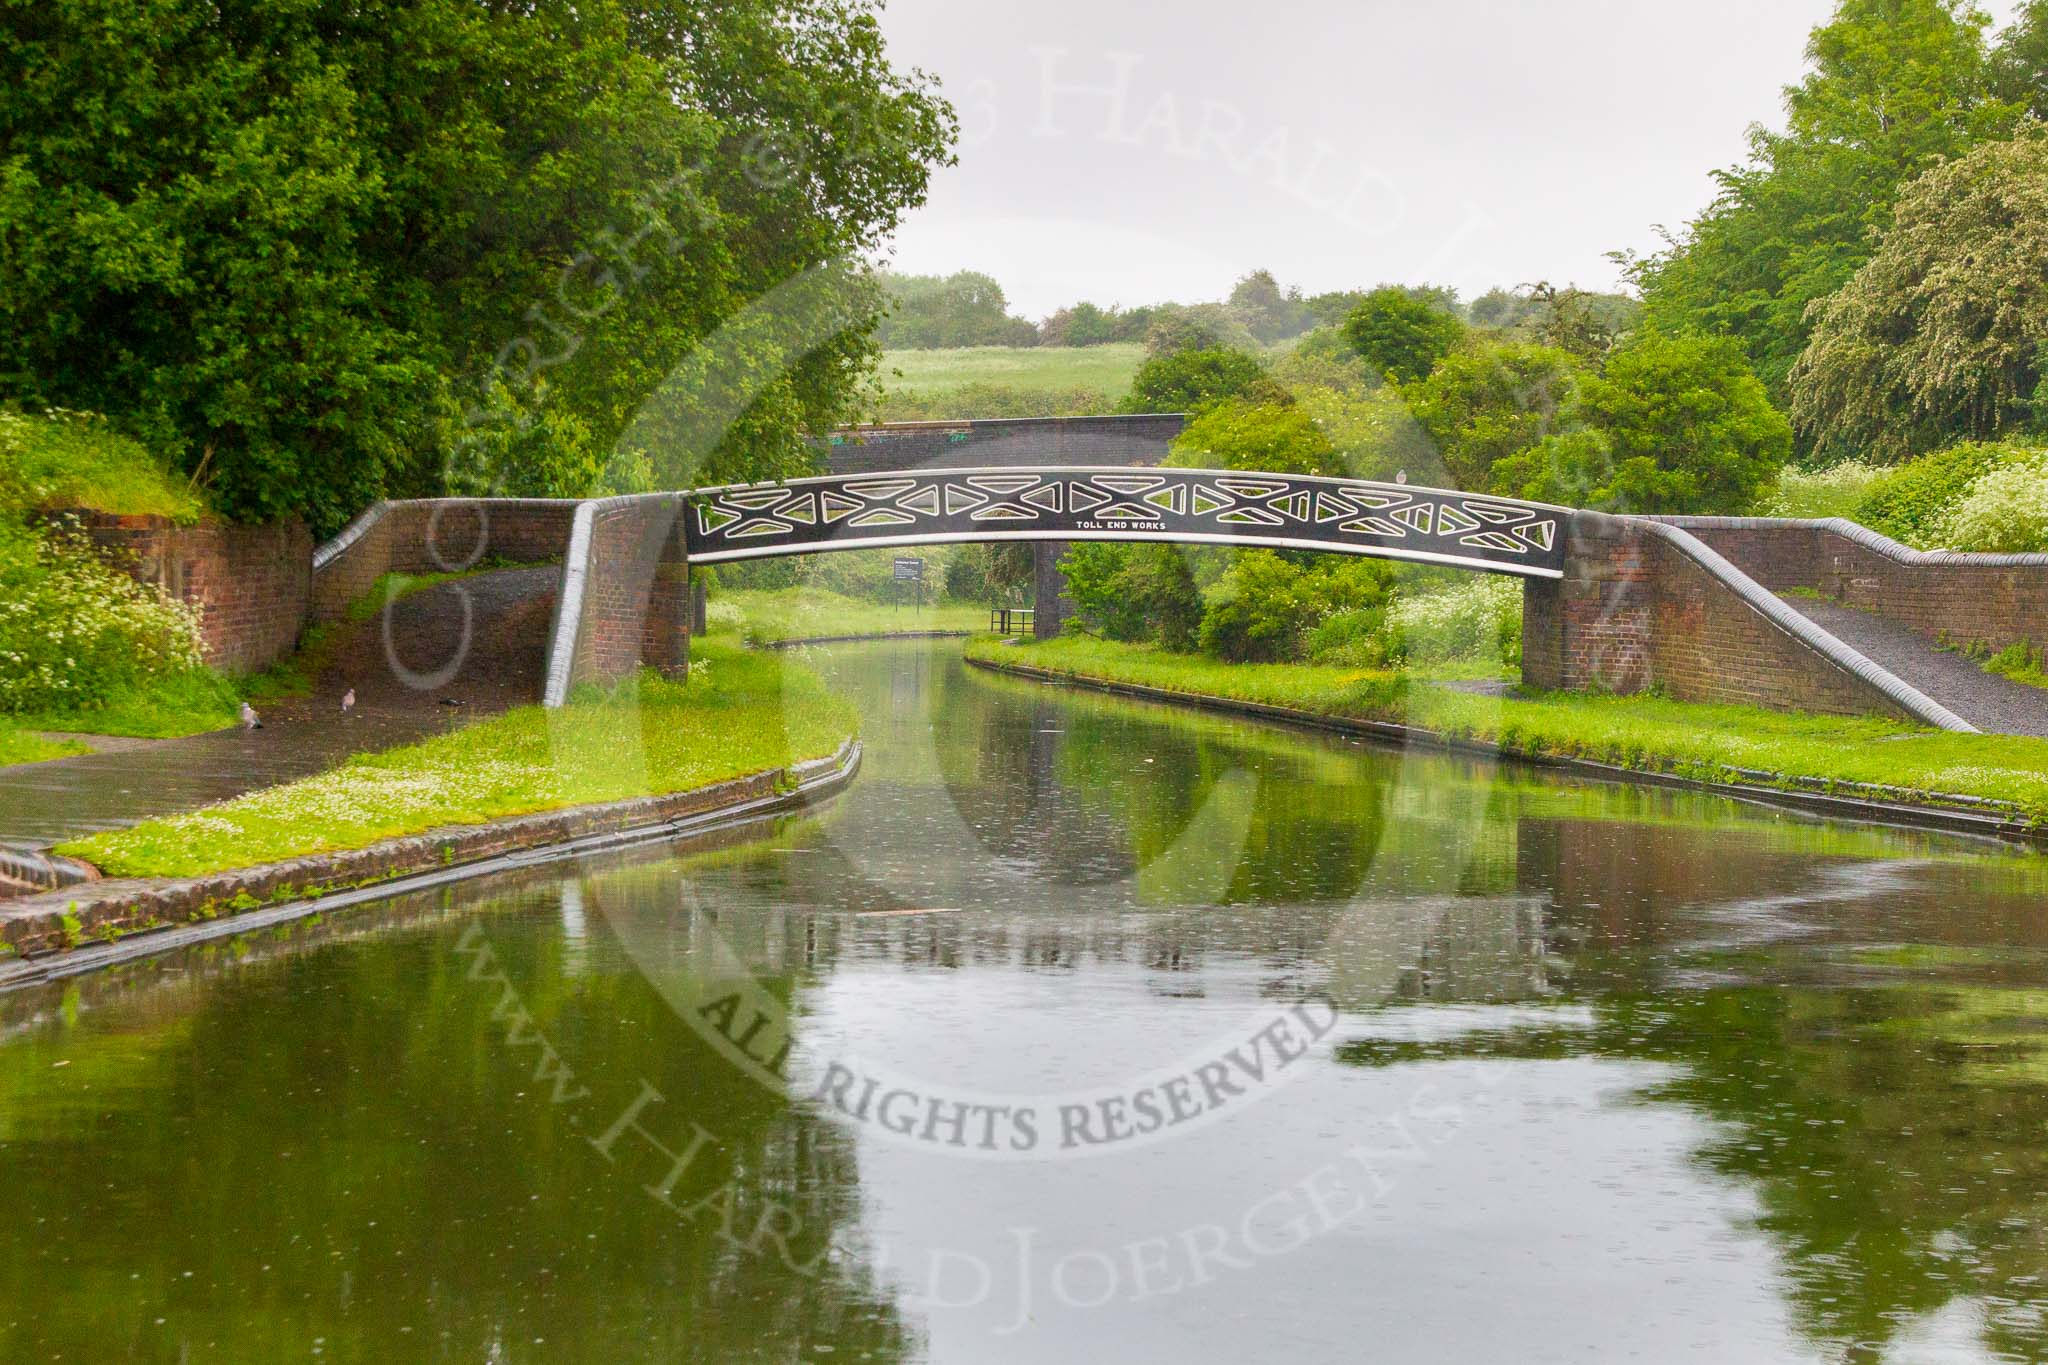 BCN Marathon Challenge 2014: Toll End Works rowing brige over the Dudley No 1 Canal at Windmill End Junction, with Netherton Tunnel ahead.
Birmingham Canal Navigation,


United Kingdom,
on 25 May 2014 at 06:36, image #202